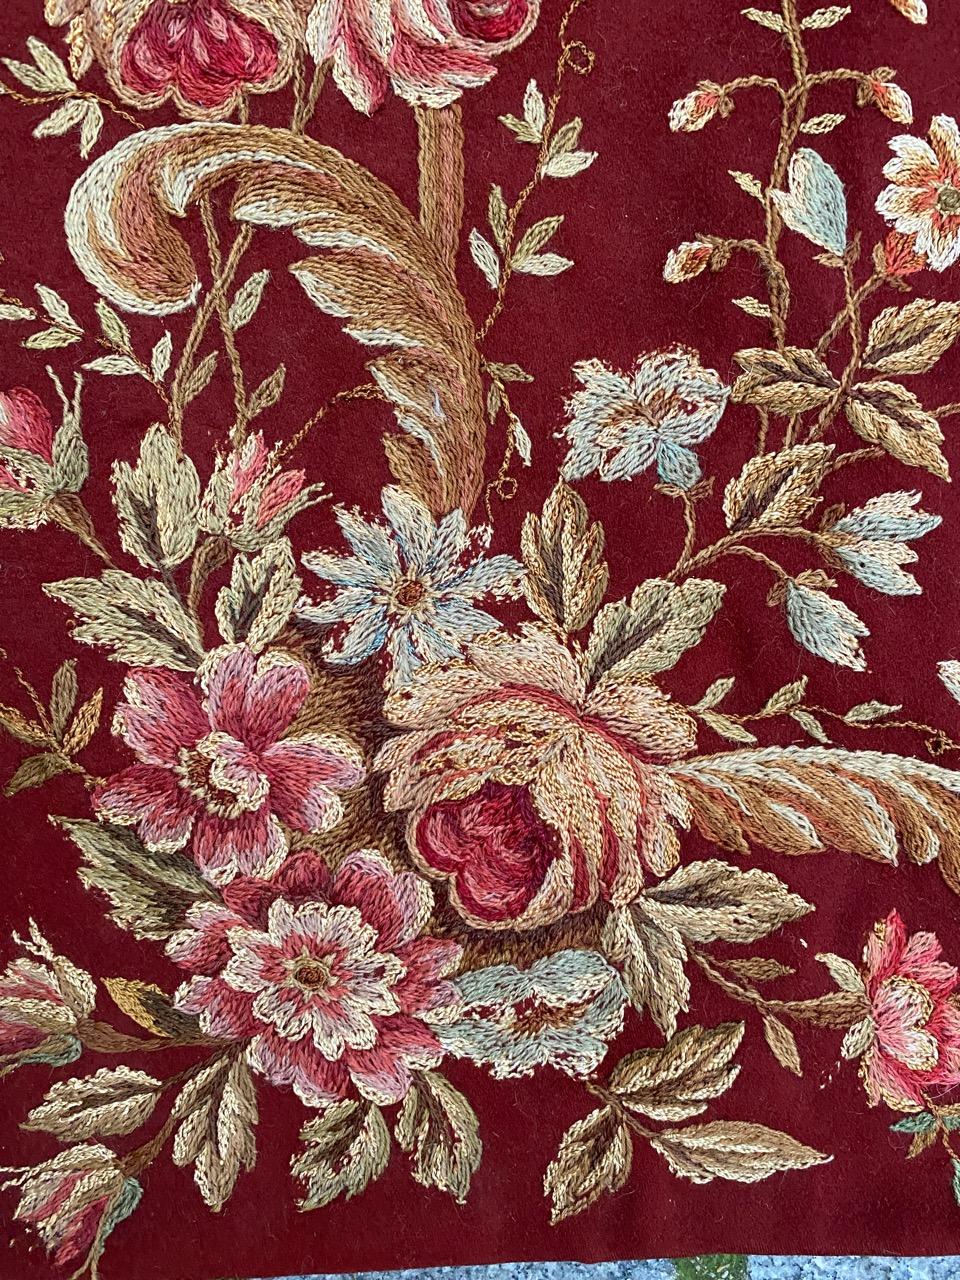 Bobyrug’s Very Beautiful Embroidered Antique Pair of Curtains For Sale 3